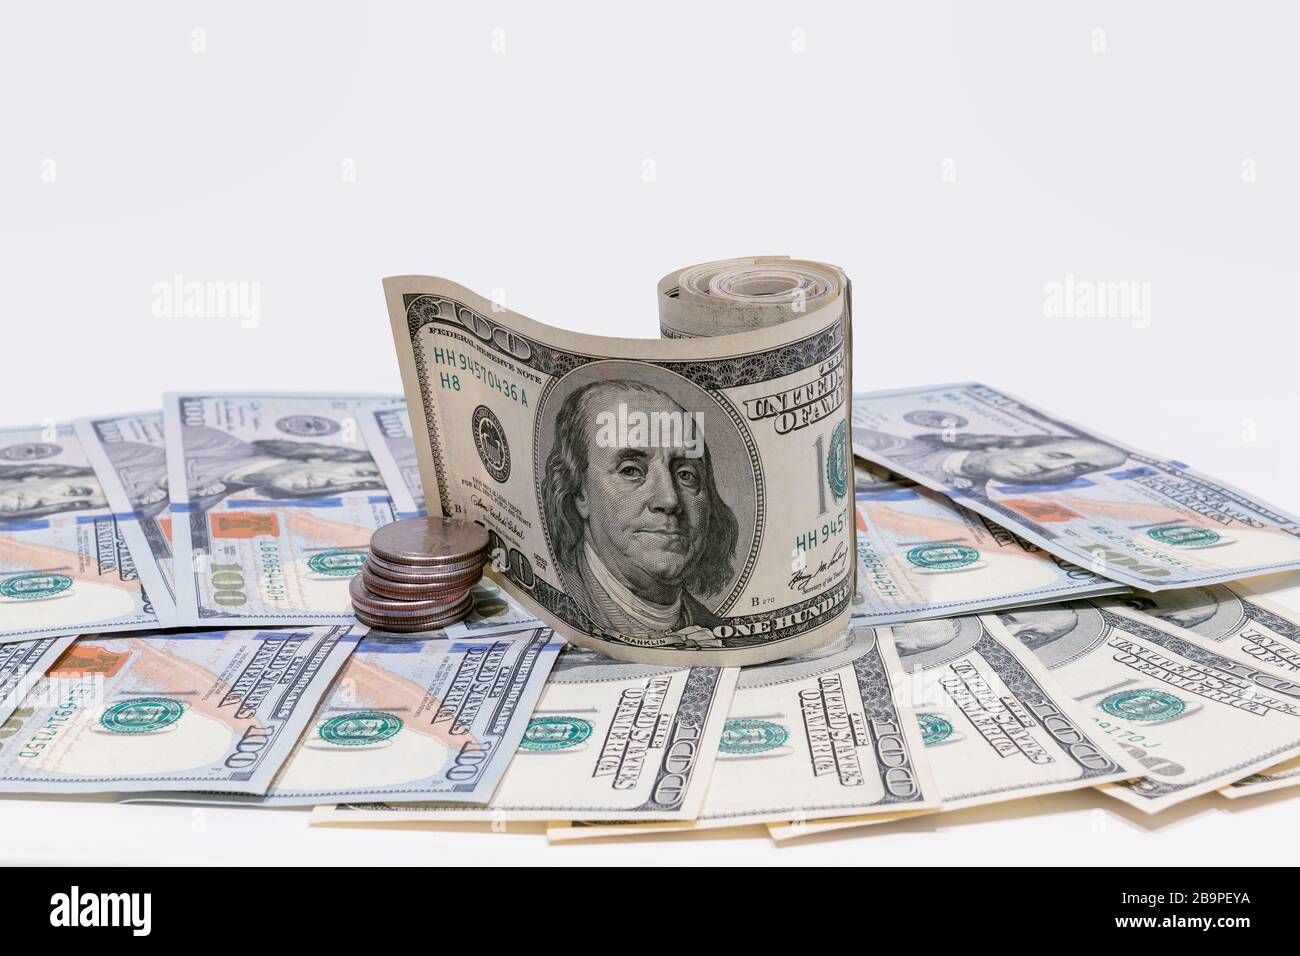 Hundred American dollars and coins. Stock Photo